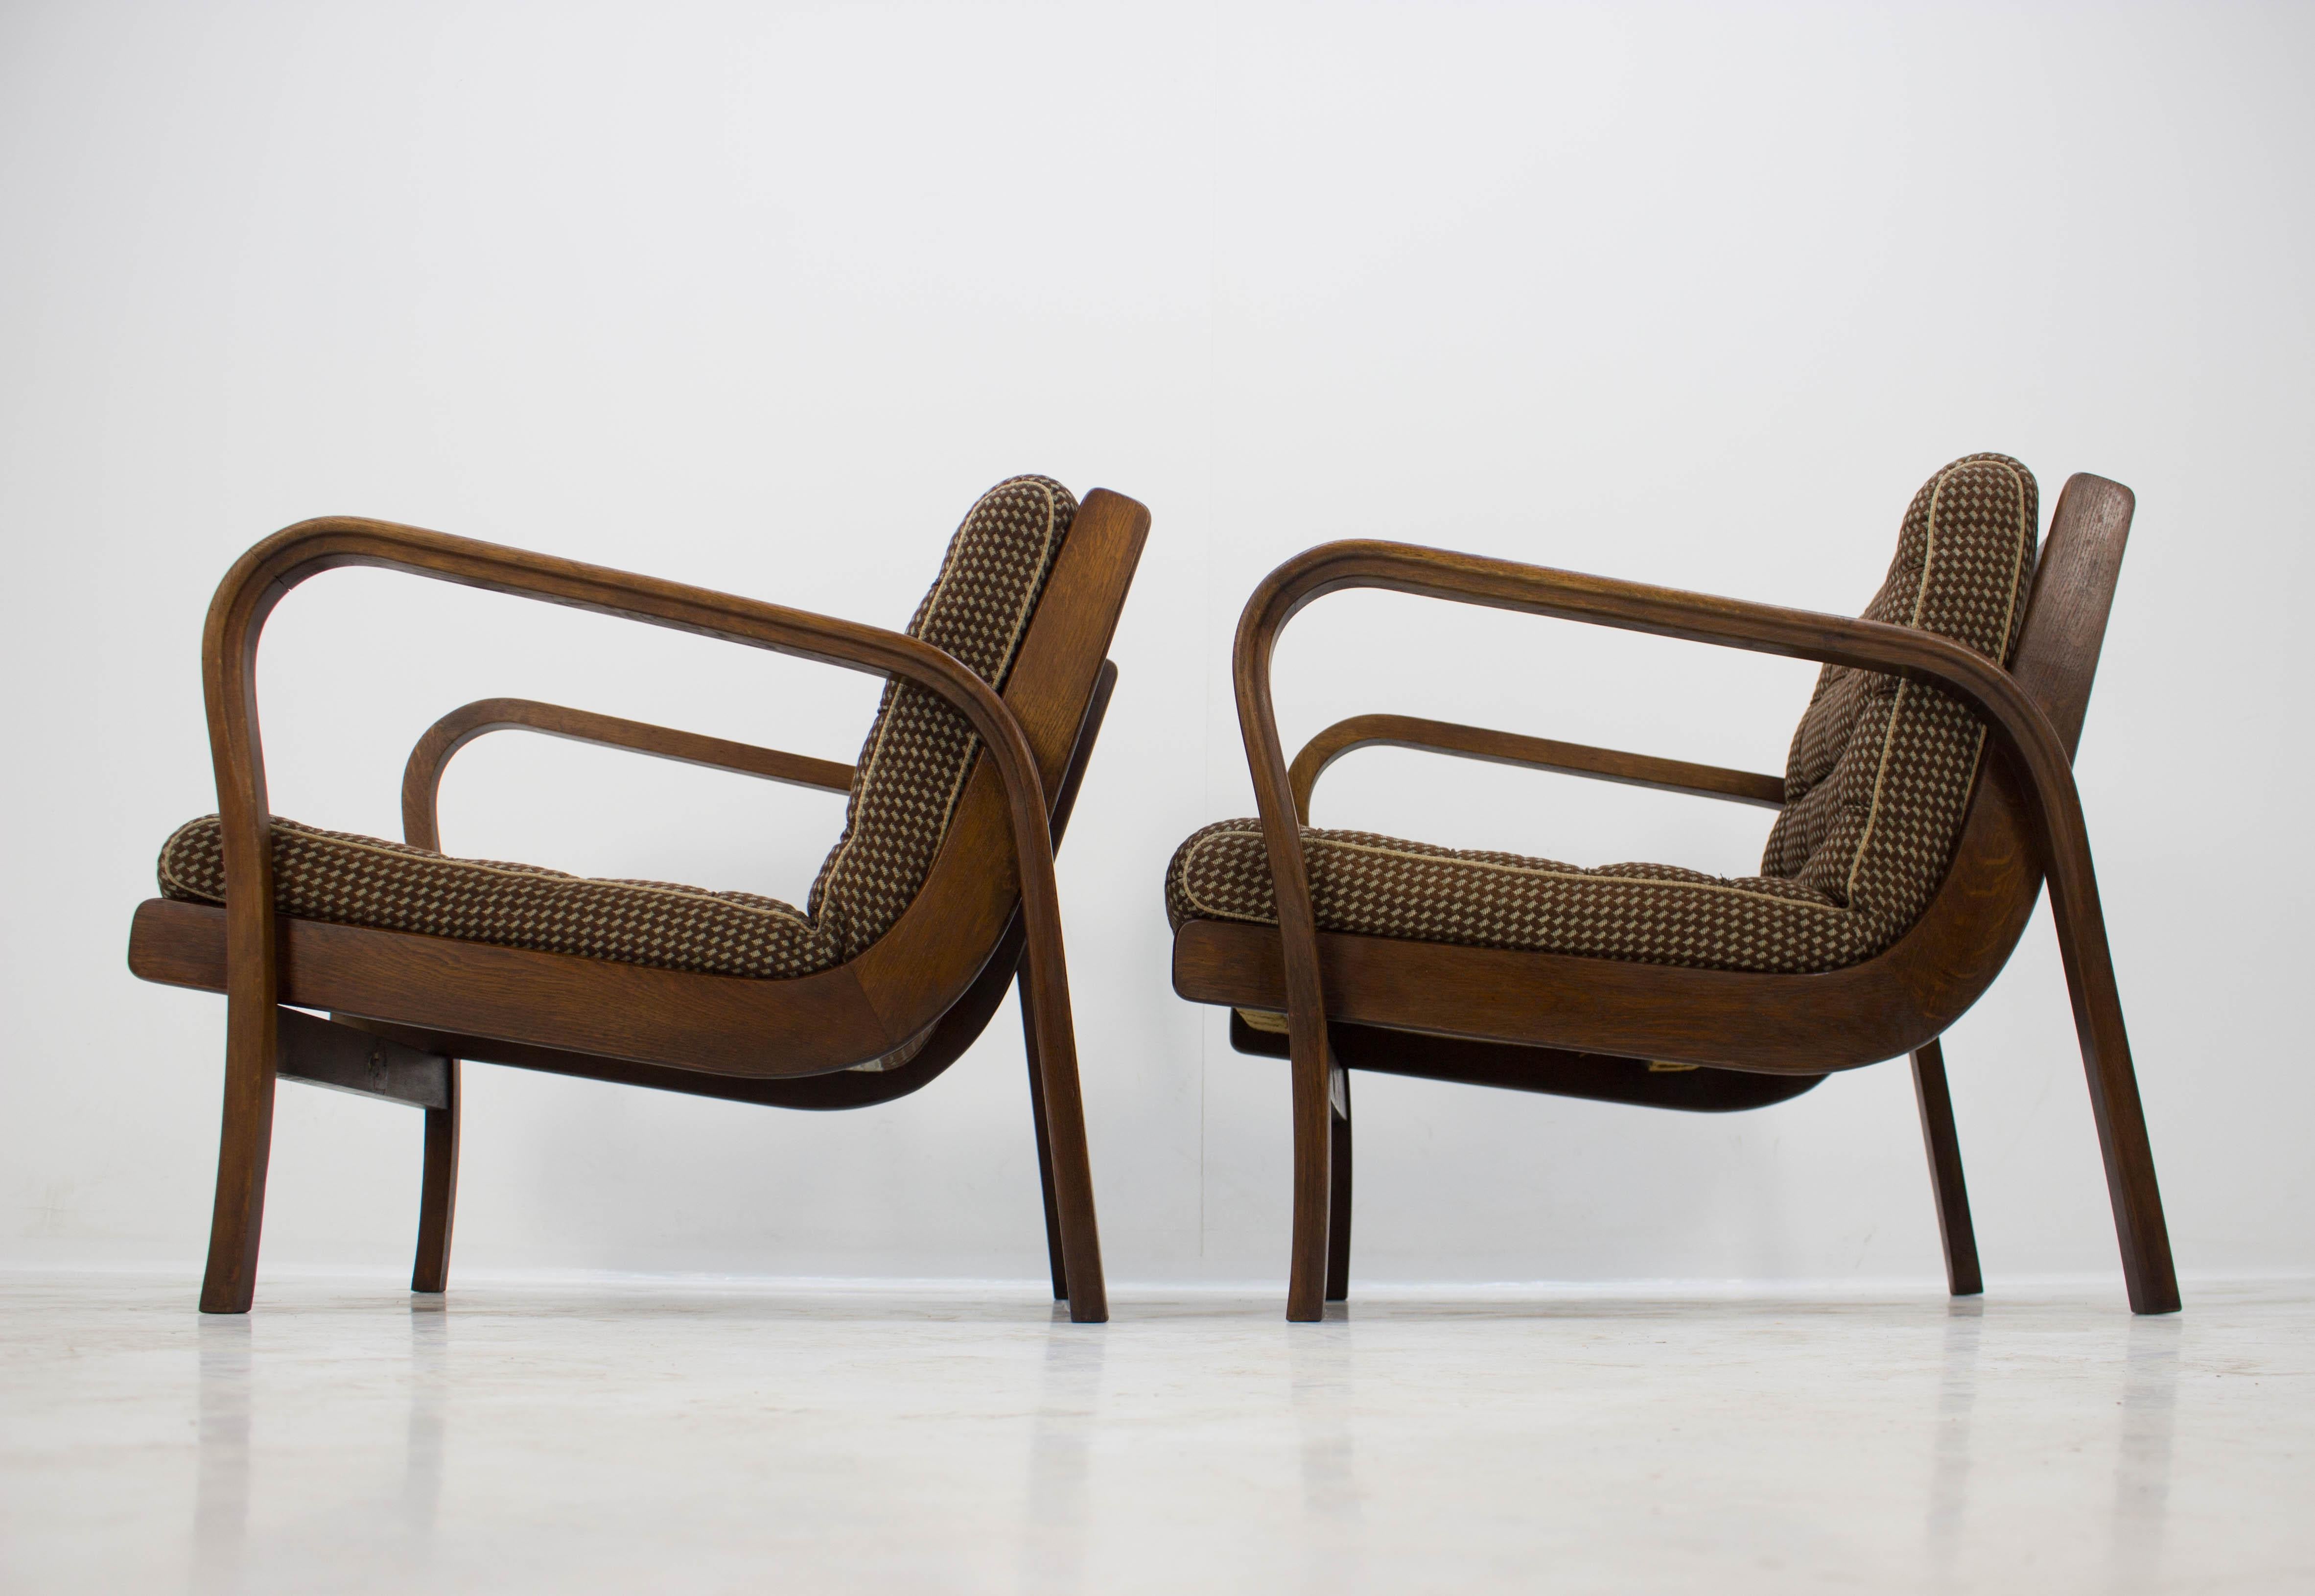 1940s lounge armchairs made in Czechoslovakia and designed by Karel Kozelka & Antonin Kropacek. This model won the silver metal at the Triennale in 1944. The wooden part with nice patina was restored. Removable upholster is in original condition and